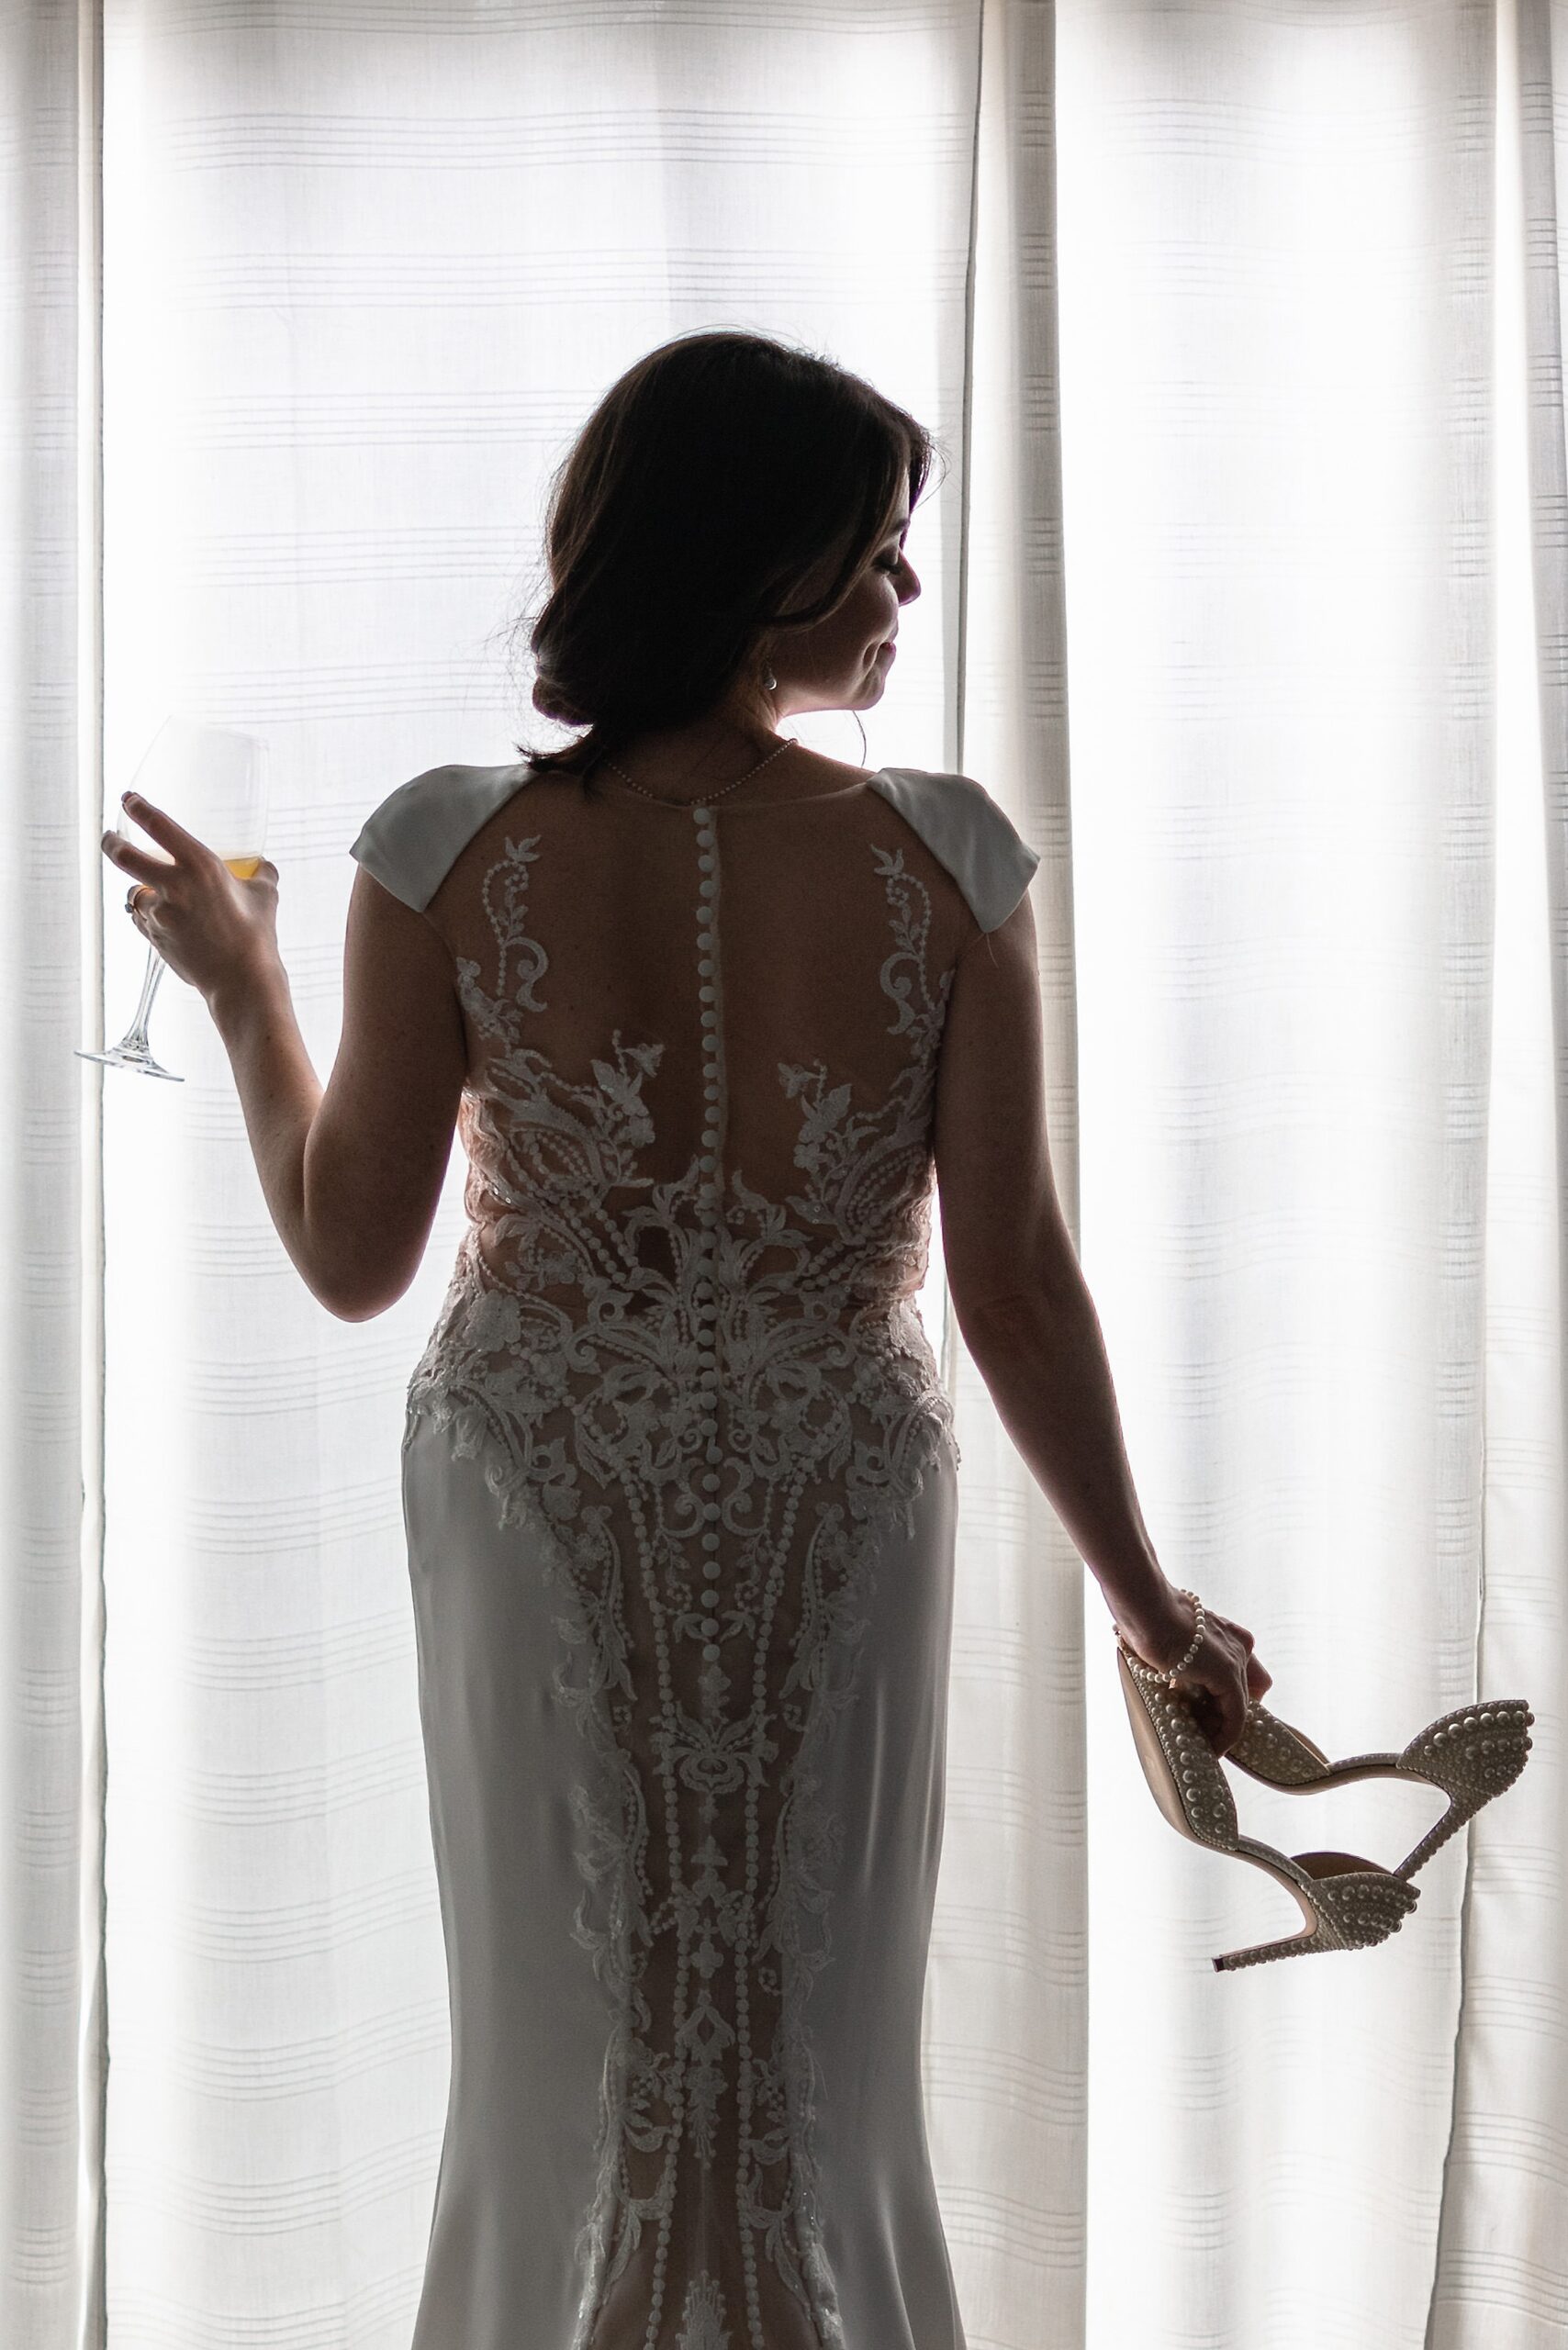 A bride in a lace dress stands in a window holding her shoes and a glass of wine after hiring orlando wedding planners